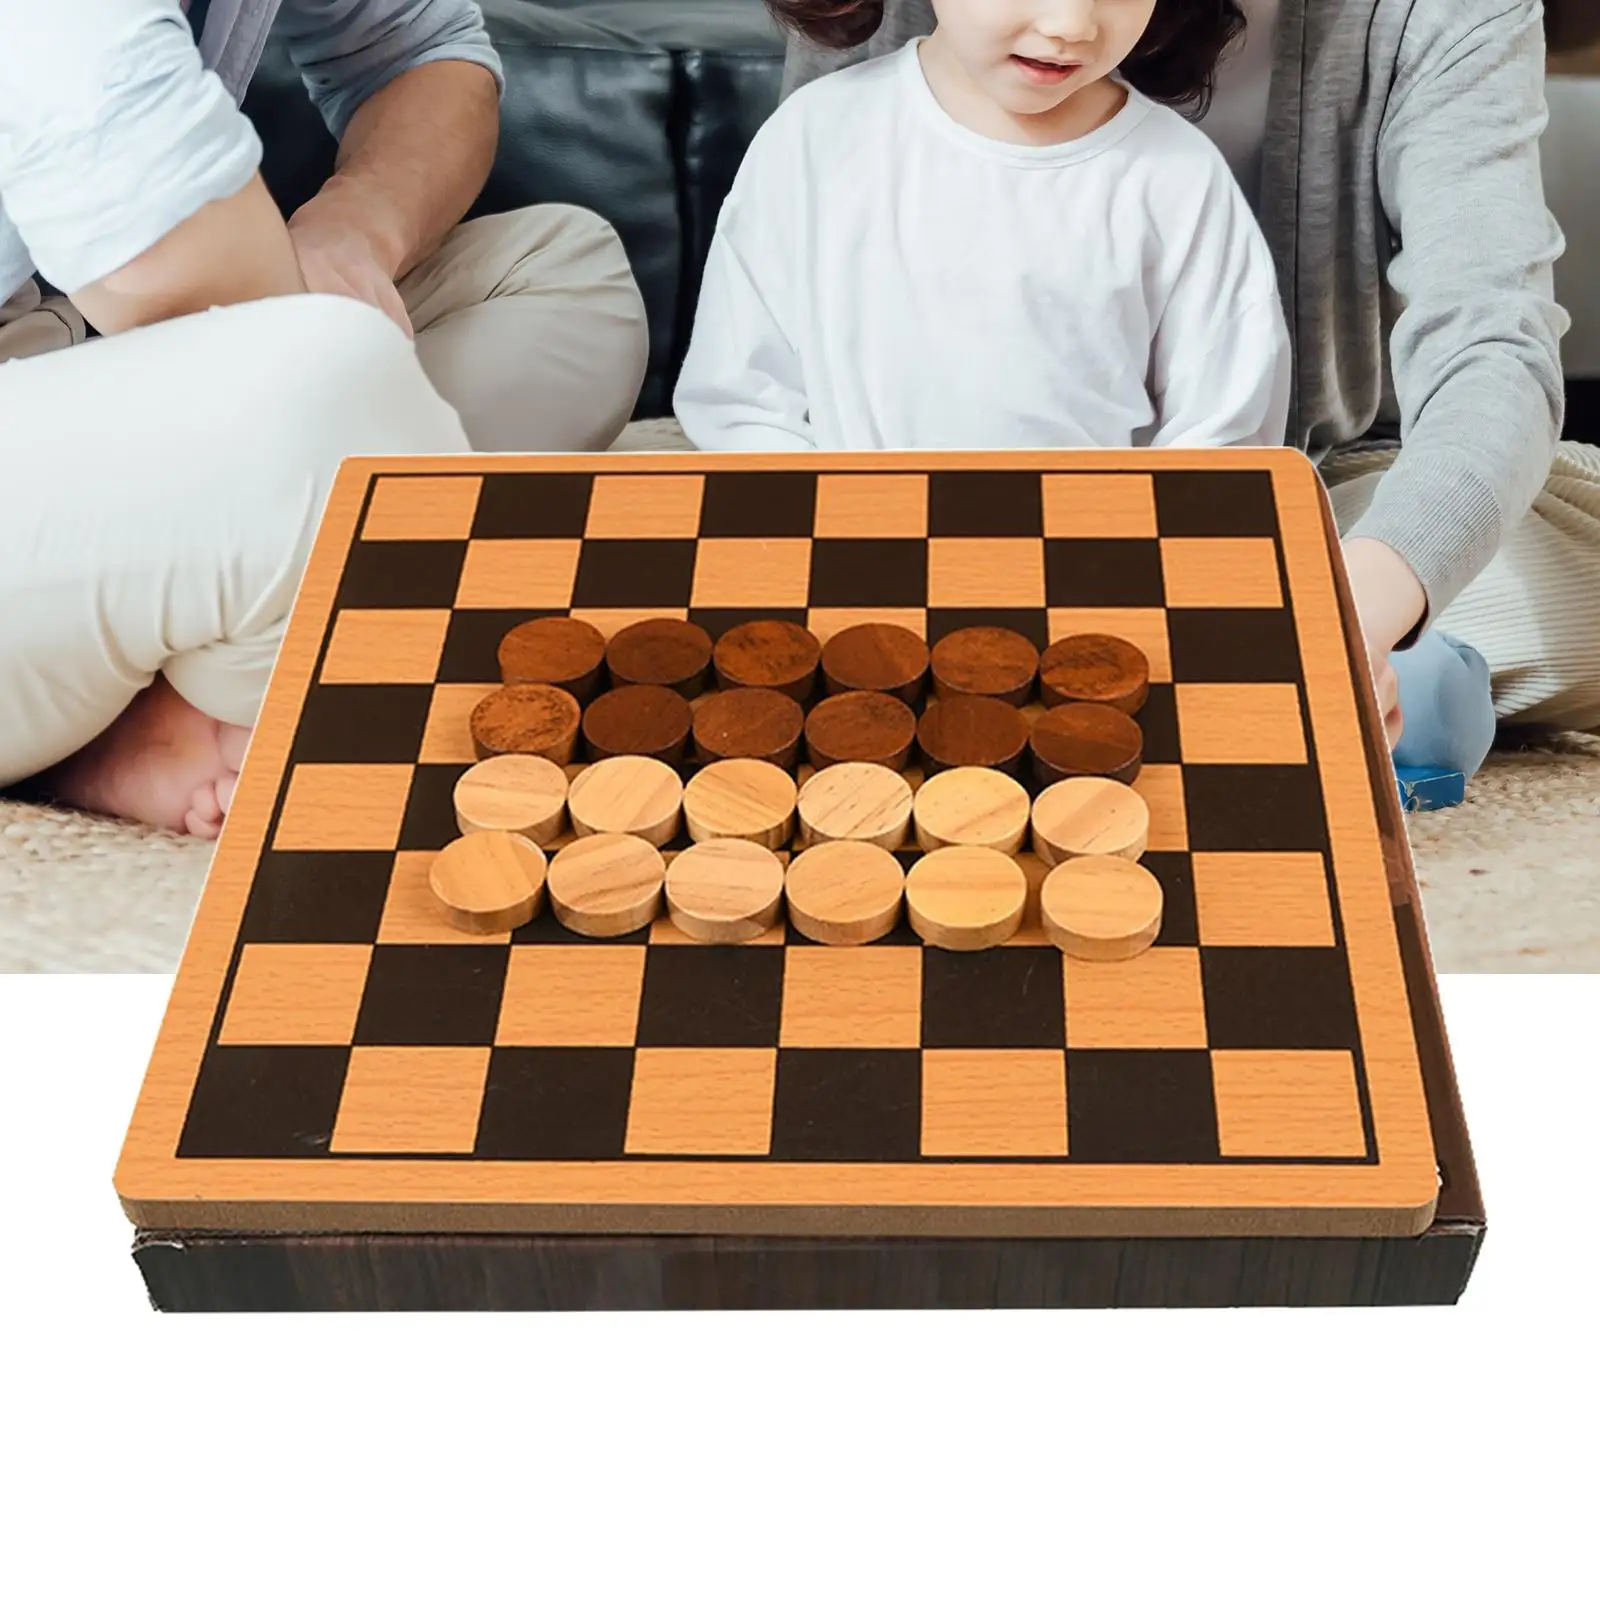 International Chess Game Set Accessories Decorative Ornament Early Education Toys Craft Figurine Wooden for Traveling Home Gifts